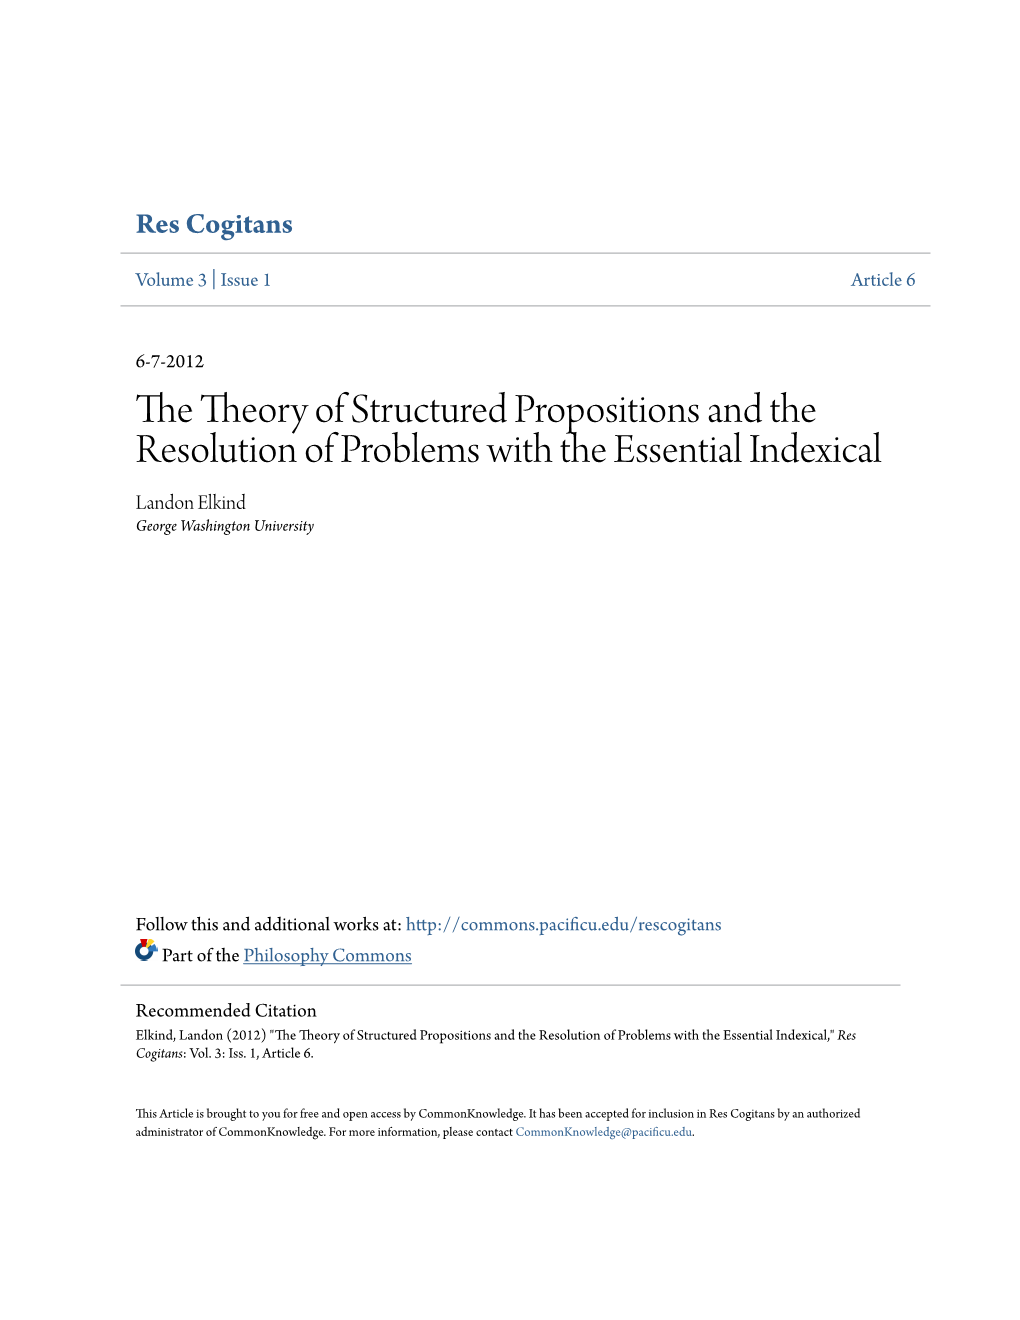 The Theory of Structured Propositions and the Resolution of Problems with the Essential Indexical Landon Elkind George Washington University